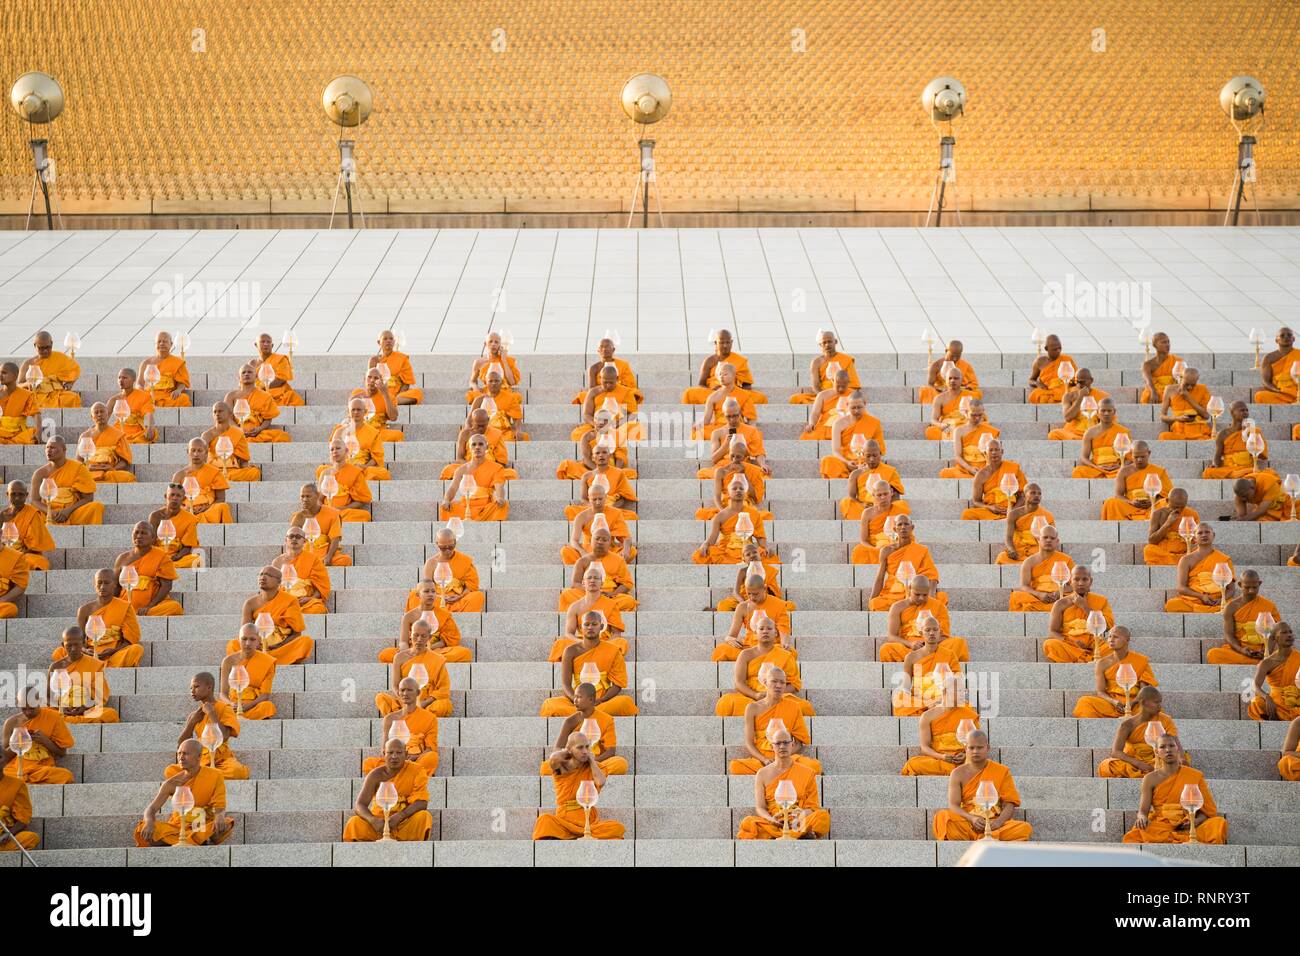 Monks seen praying while holding lanterns during the yearly Makha Bucha ceremony. Buddhist devotees celebrate the annual festival of Makha Bucha, one of the most important day for buddhists around the world. More than a thousand monks and hundred of thousand devotees were gathering at Dhammakaya Temple in Bangkok to attend the lighting ceremony. Stock Photo